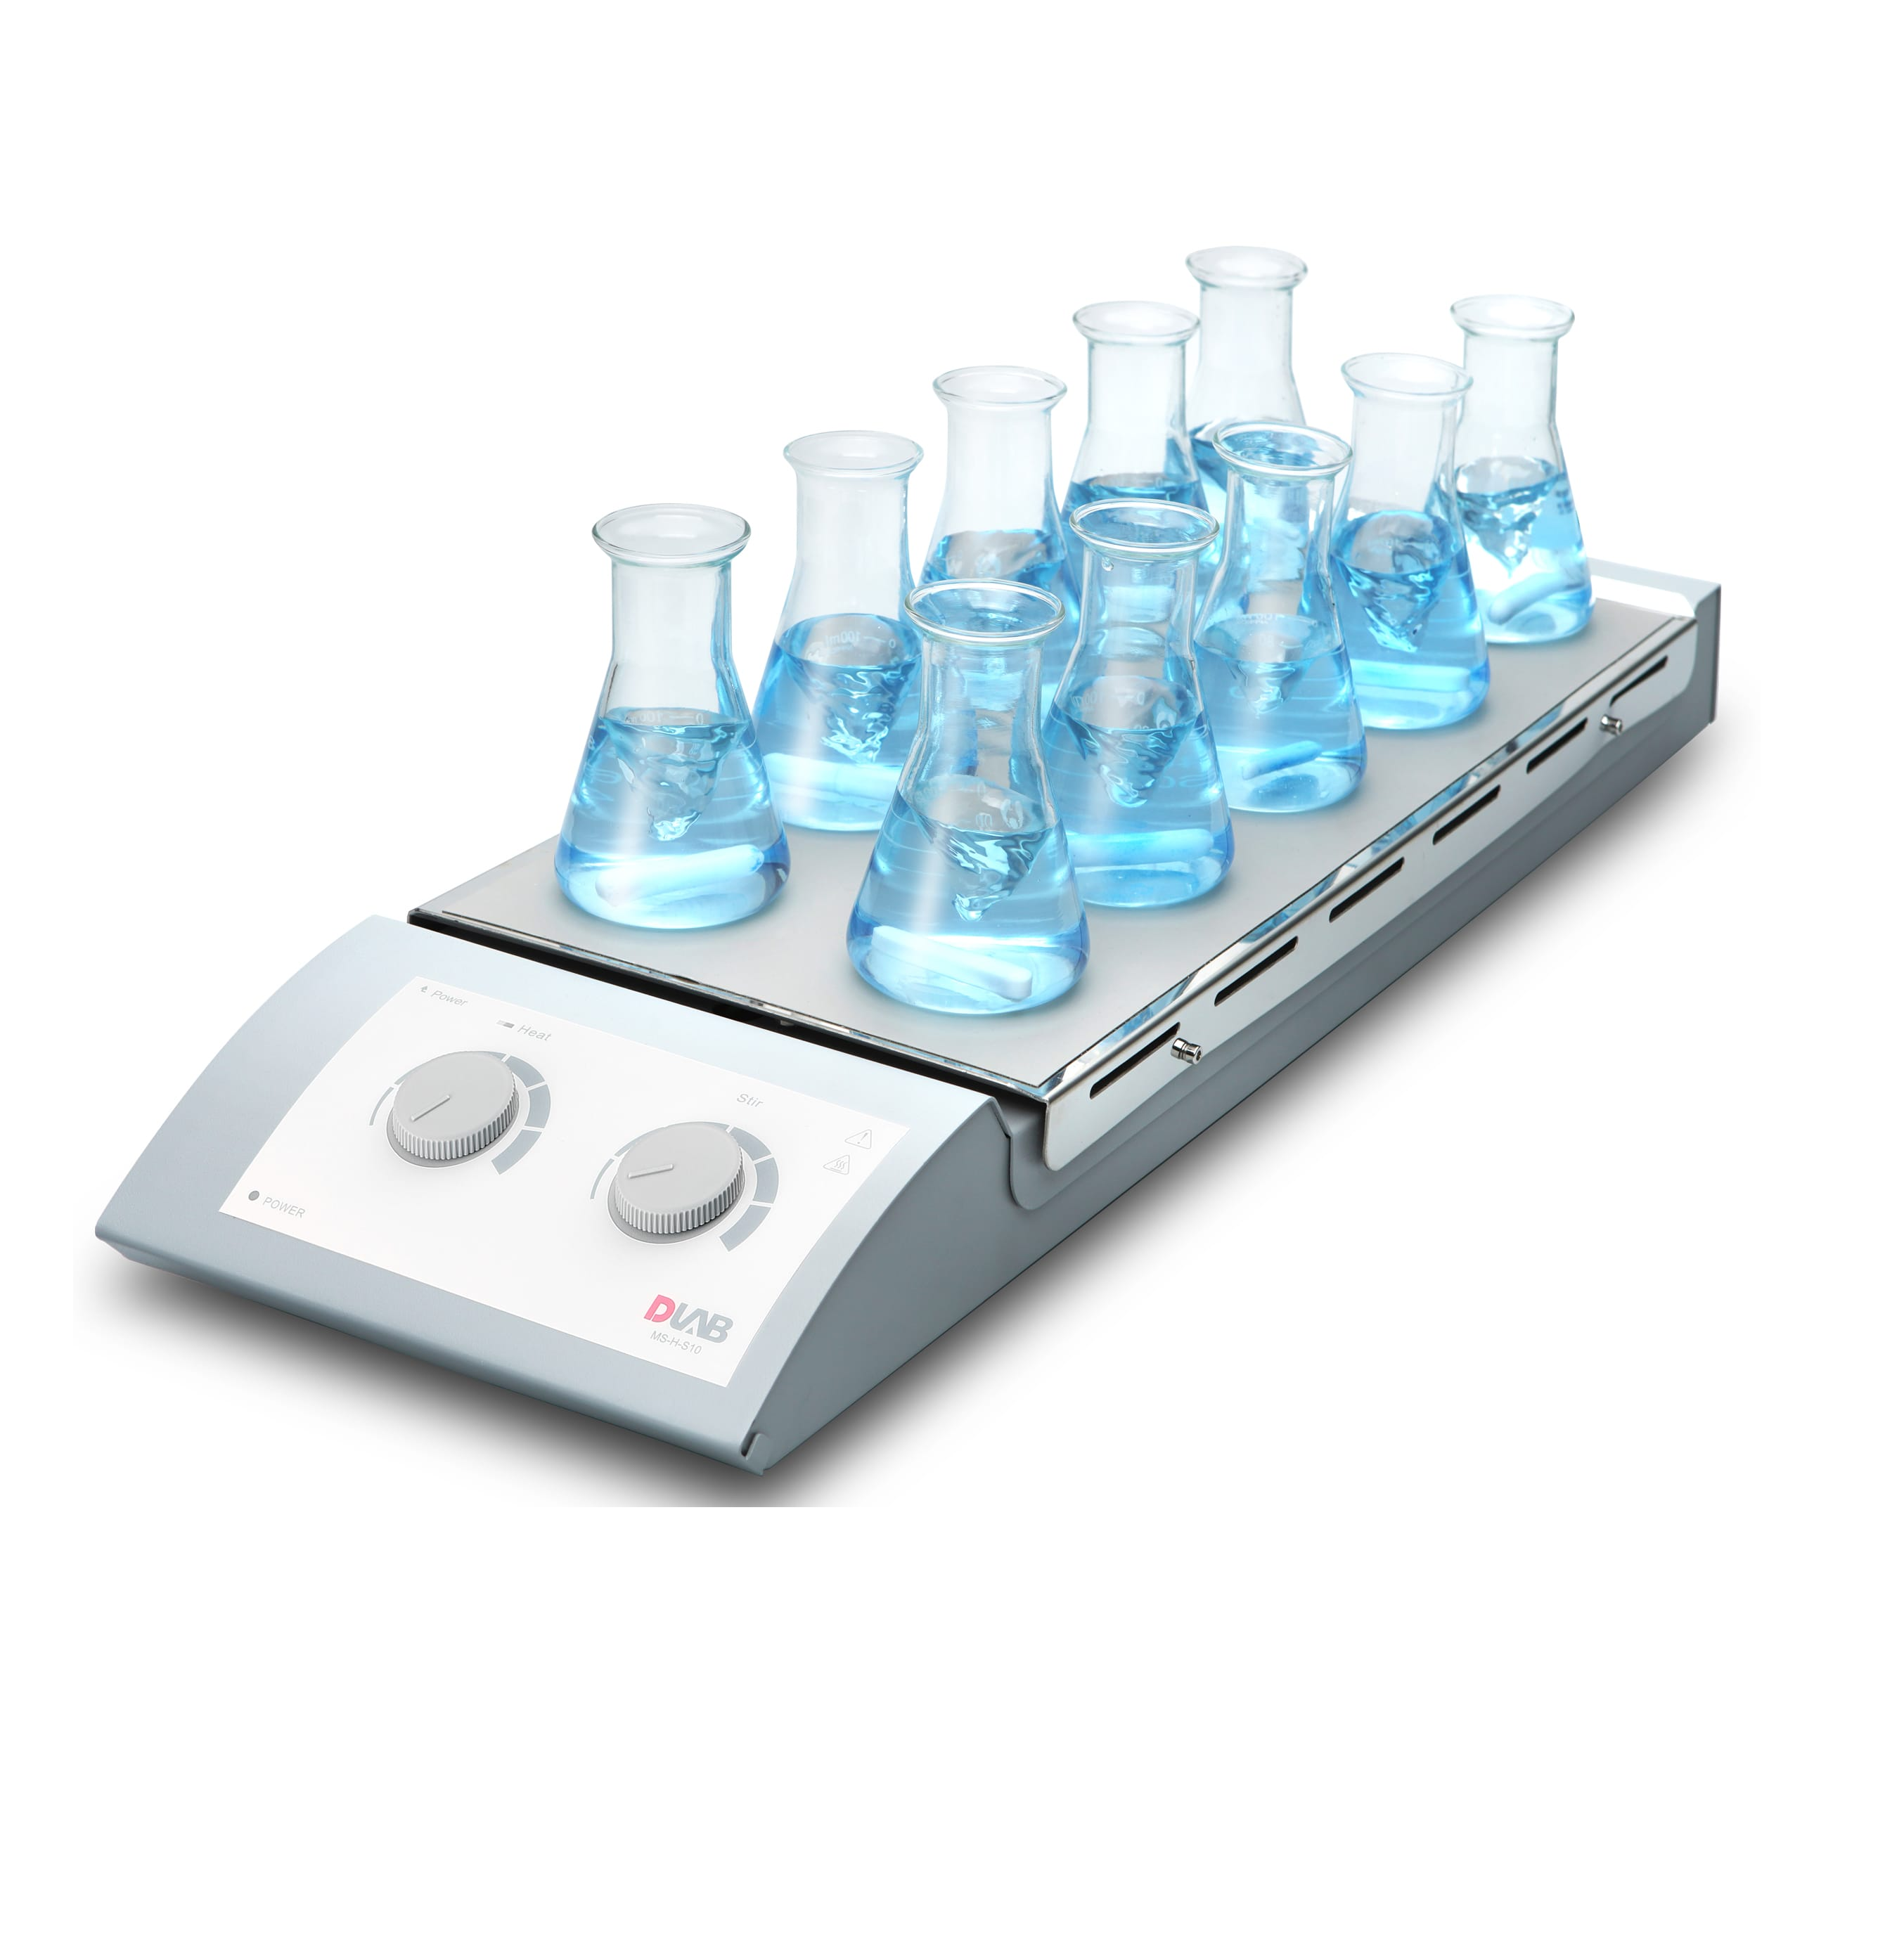 D-Lab 10-Position Classic Hotplate Magnetic Stirrer, Max. heating temperature 120°C, Work plate Dimension 180 x 450 mm, 10-Position (MS-H-S10)